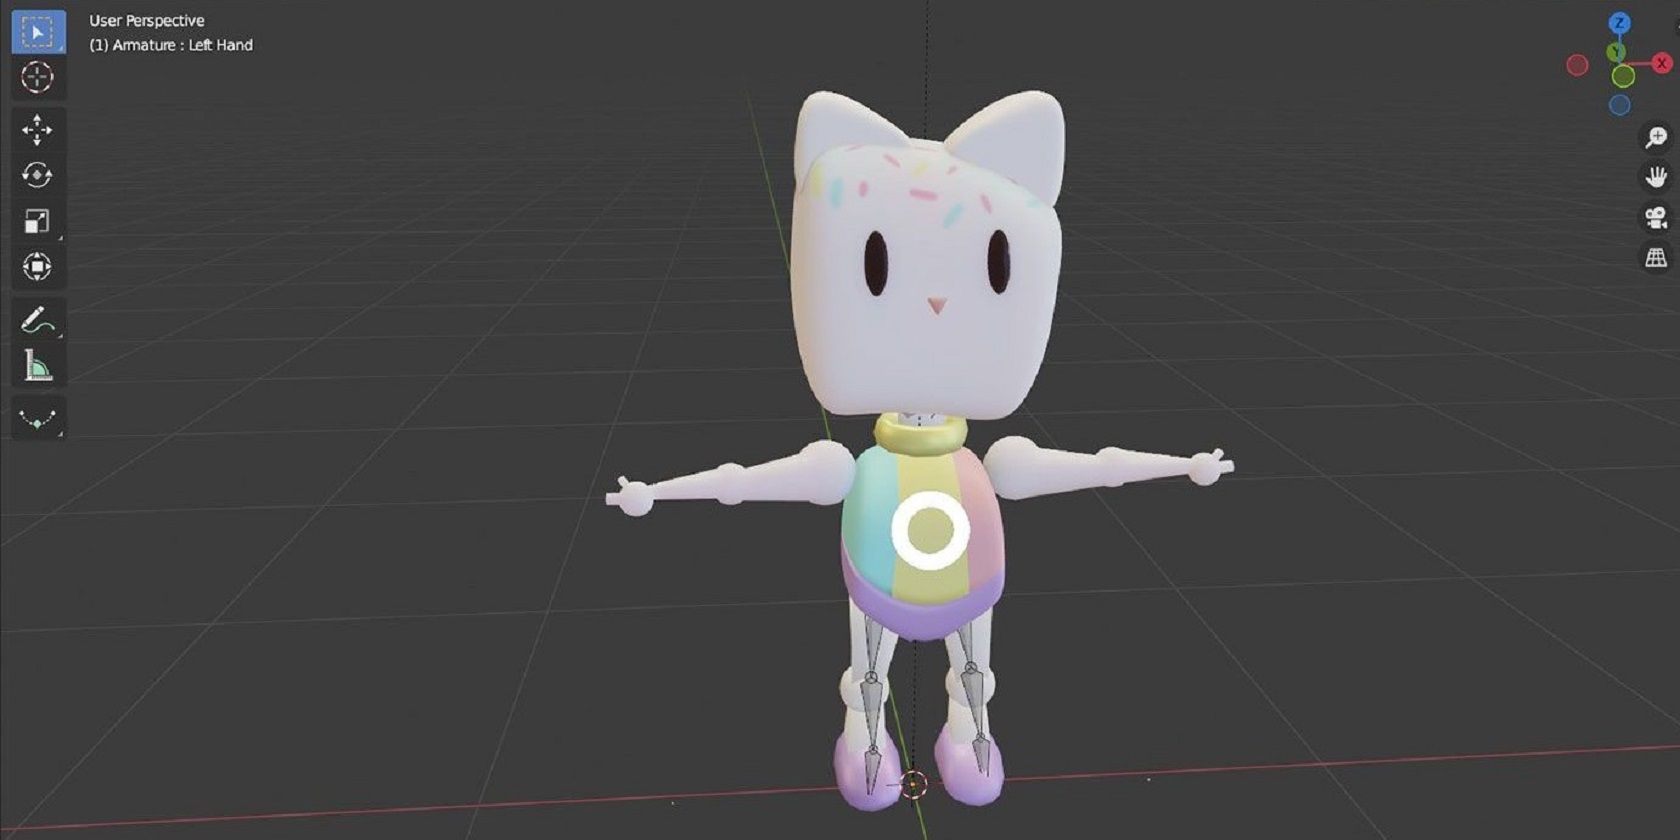 How to Create Bones for Rigging in Blender: A Step-by-Step Guide